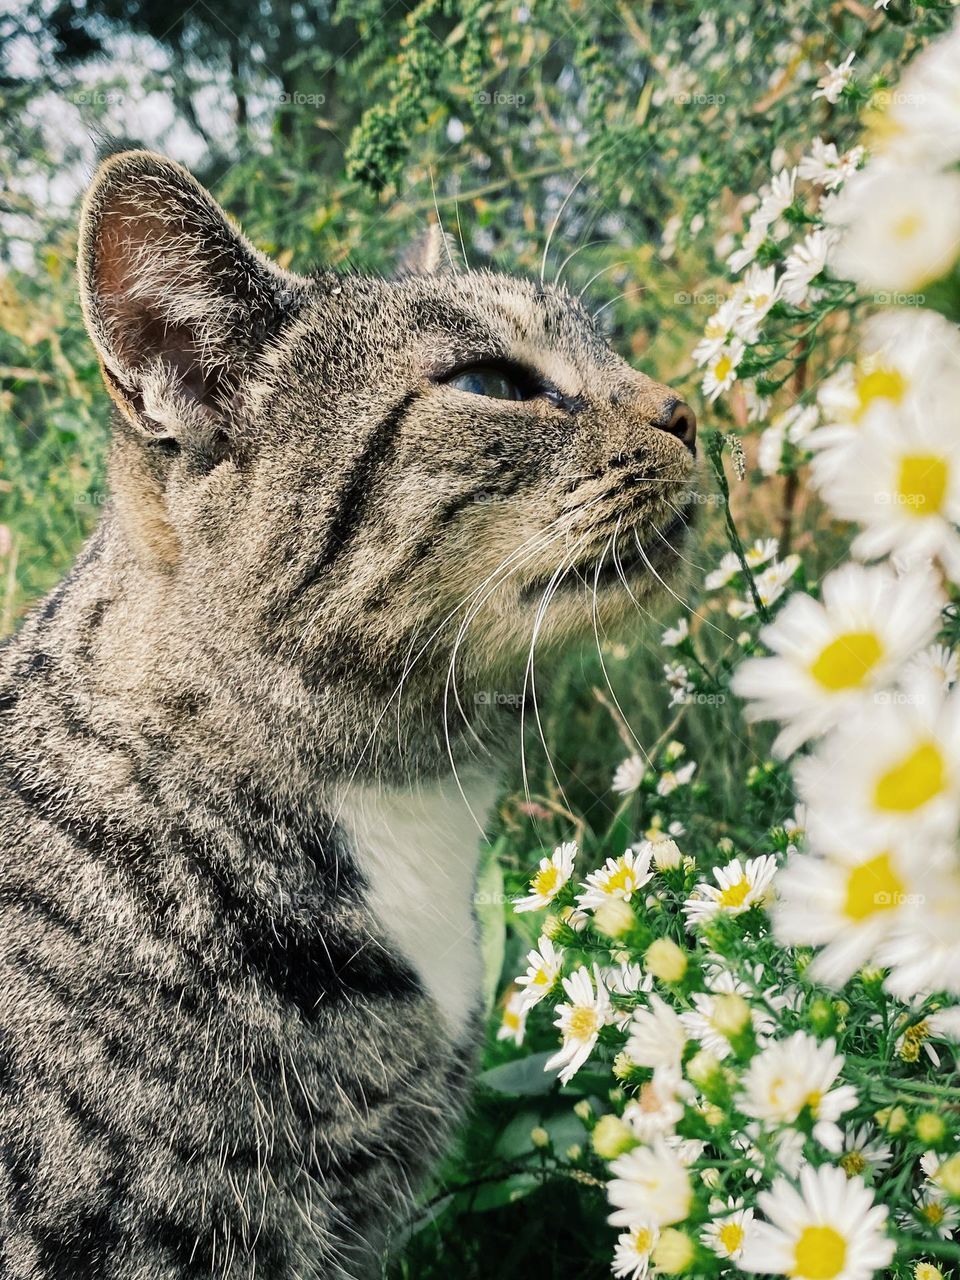 Cat smelling flowers 